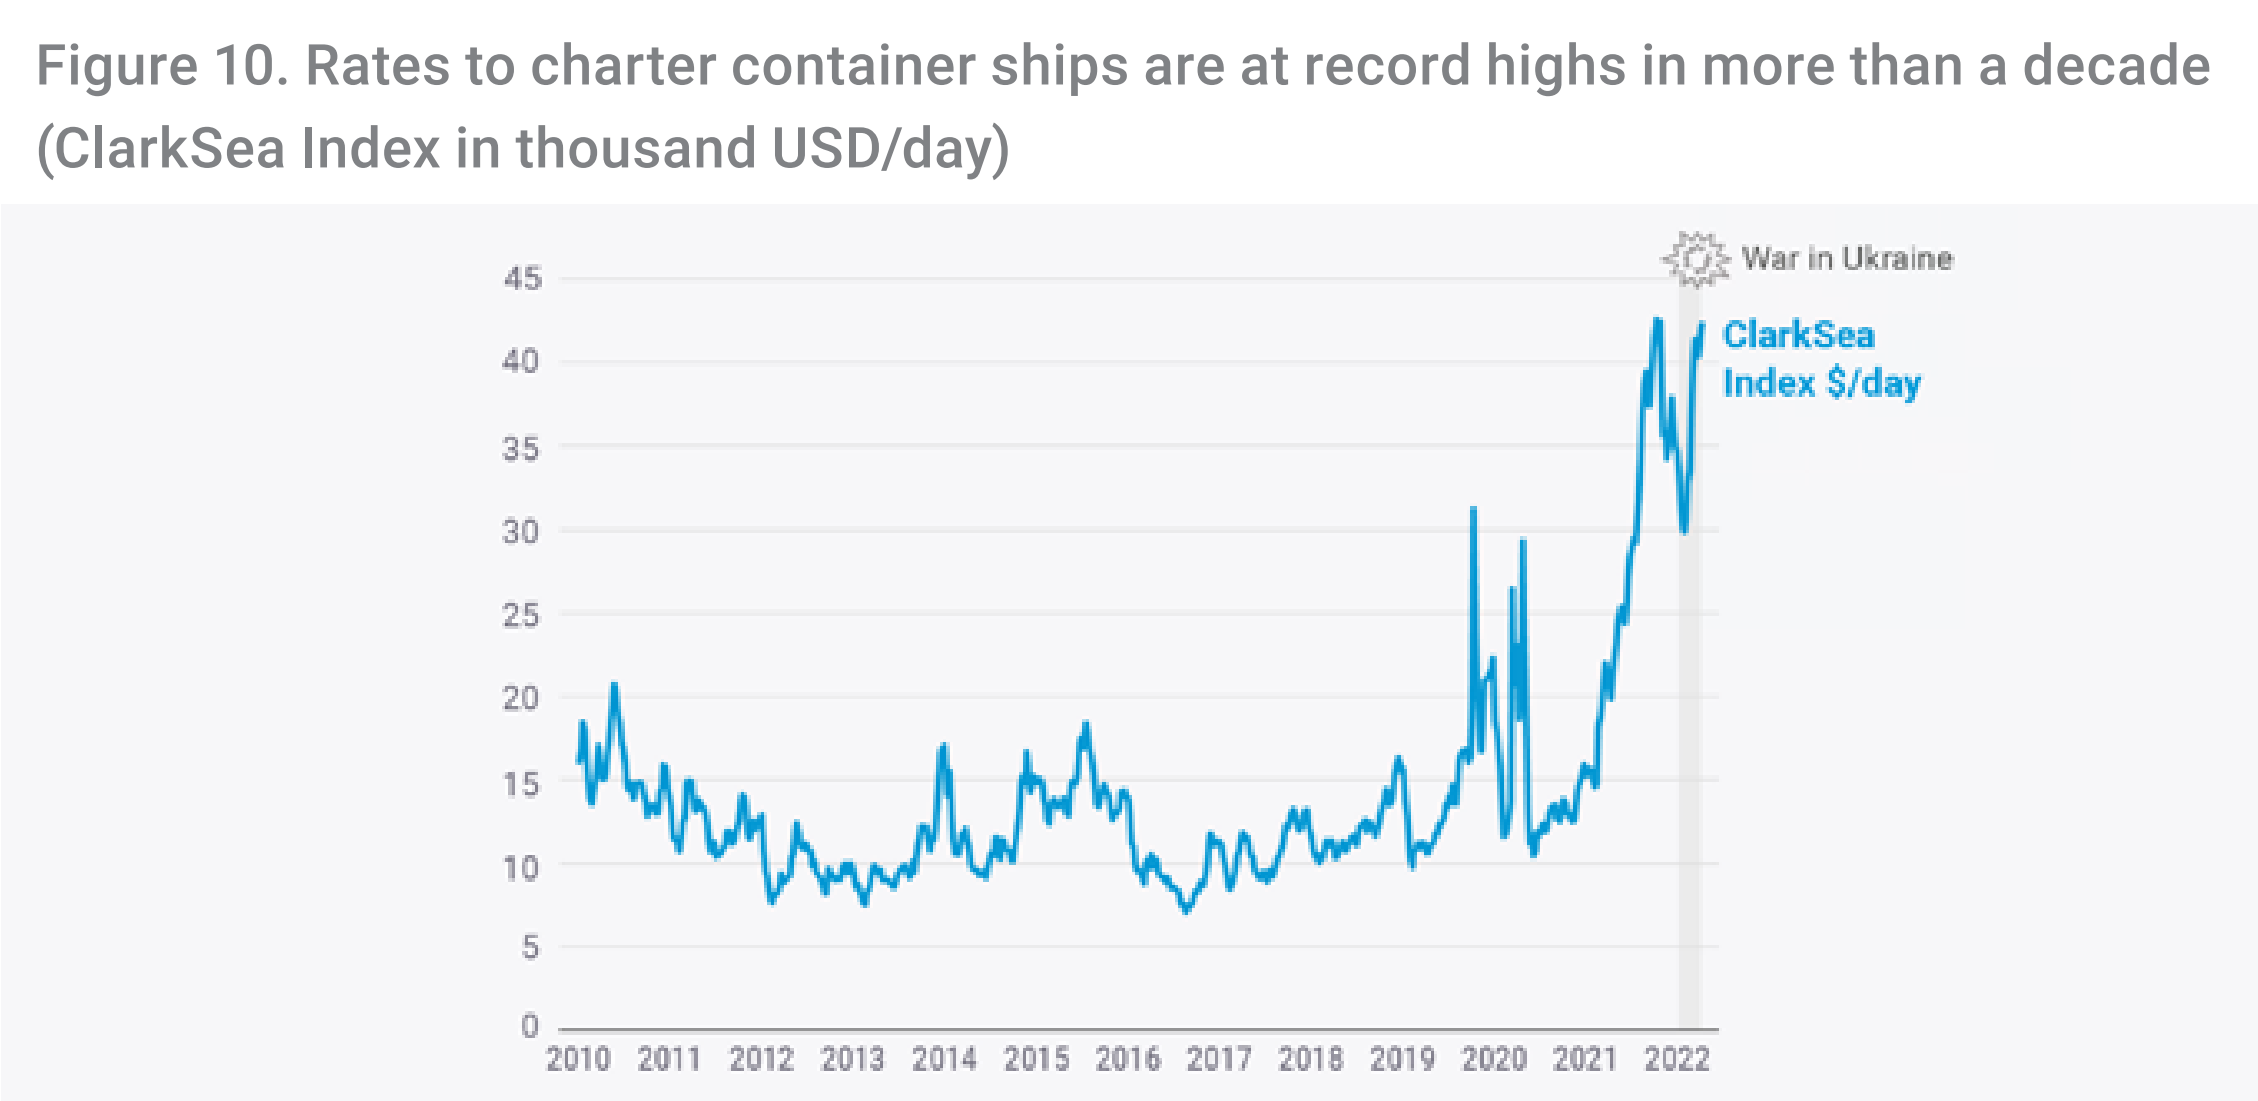 Rates to charter container ships, 2010-2022. Rates to charter container ships are at record highs in more than a decade. ClarkSea Index in thousand USD/day. Graphic: UNCTAD